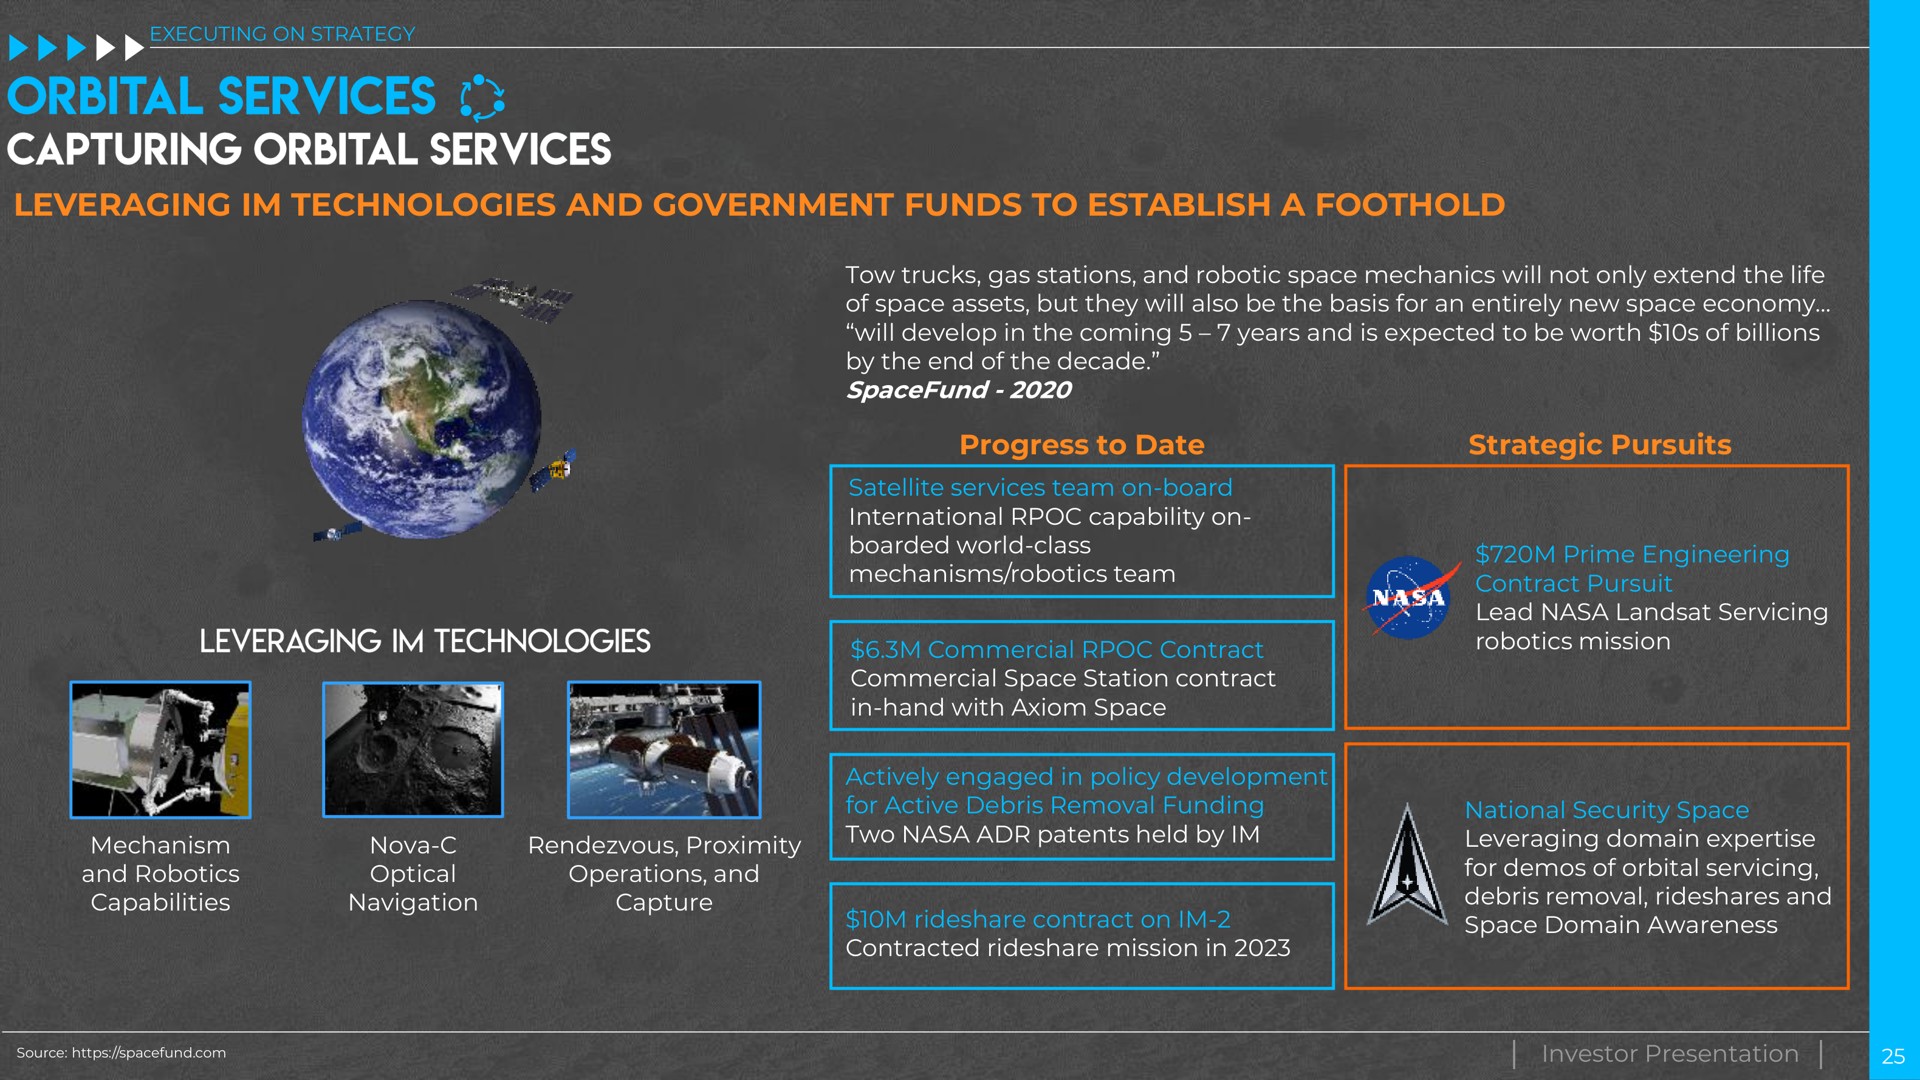 leveraging technologies and government funds to establish a foothold tow trucks gas stations and space mechanics will not only extend the life of space assets but they will also be the basis for an entirely new space economy will develop in the coming years and is expected to be worth of billions by the end of the decade progress to date strategic pursuits satellite services team on board international capability on boarded world class mechanisms team commercial contract commercial space station contract in hand with axiom space actively engaged in policy development for active debris removal funding two patents held by contract on contracted mission in prime engineering contract pursuit lead servicing mission national security space leveraging domain for of orbital servicing debris removal and space domain awareness mechanism and capabilities nova optical navigation rendezvous proximity operations and capture investor presentation capturing | Intuitive Machines